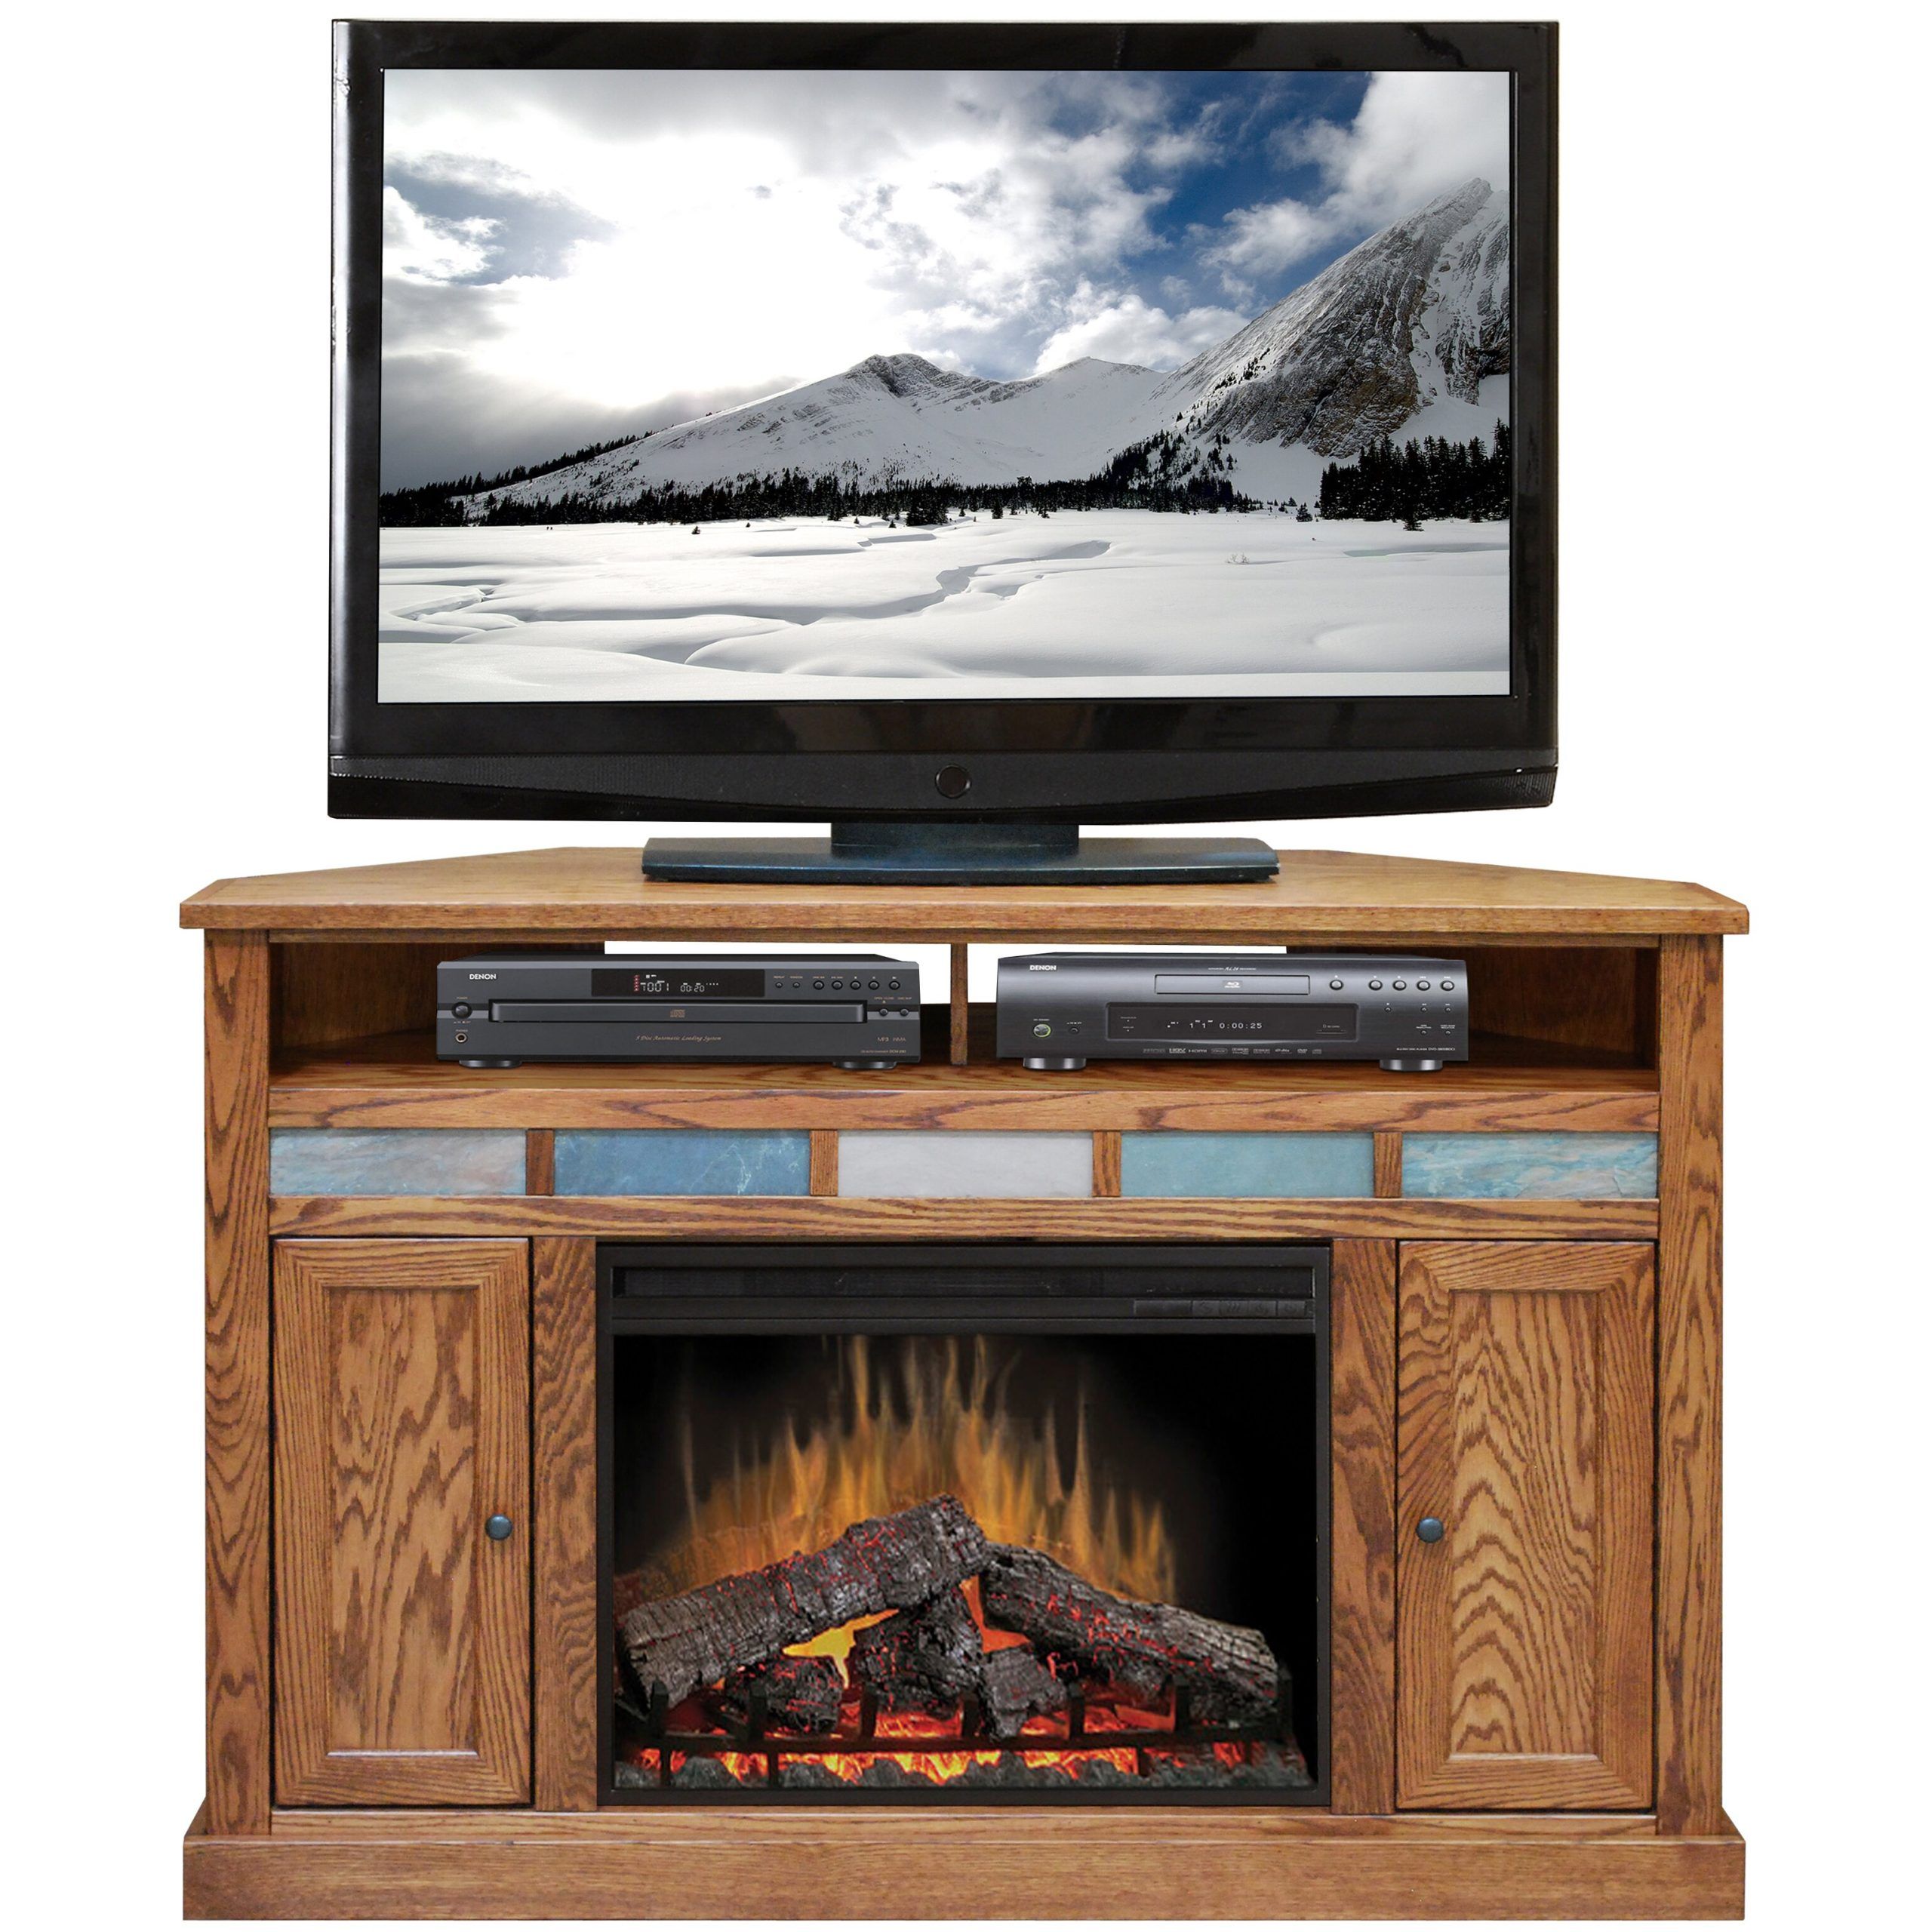 Legends Furniture Oak Creek Tv Stand With Electric Fireplace & Reviews Throughout Electric Fireplace Tv Stands (View 20 of 20)